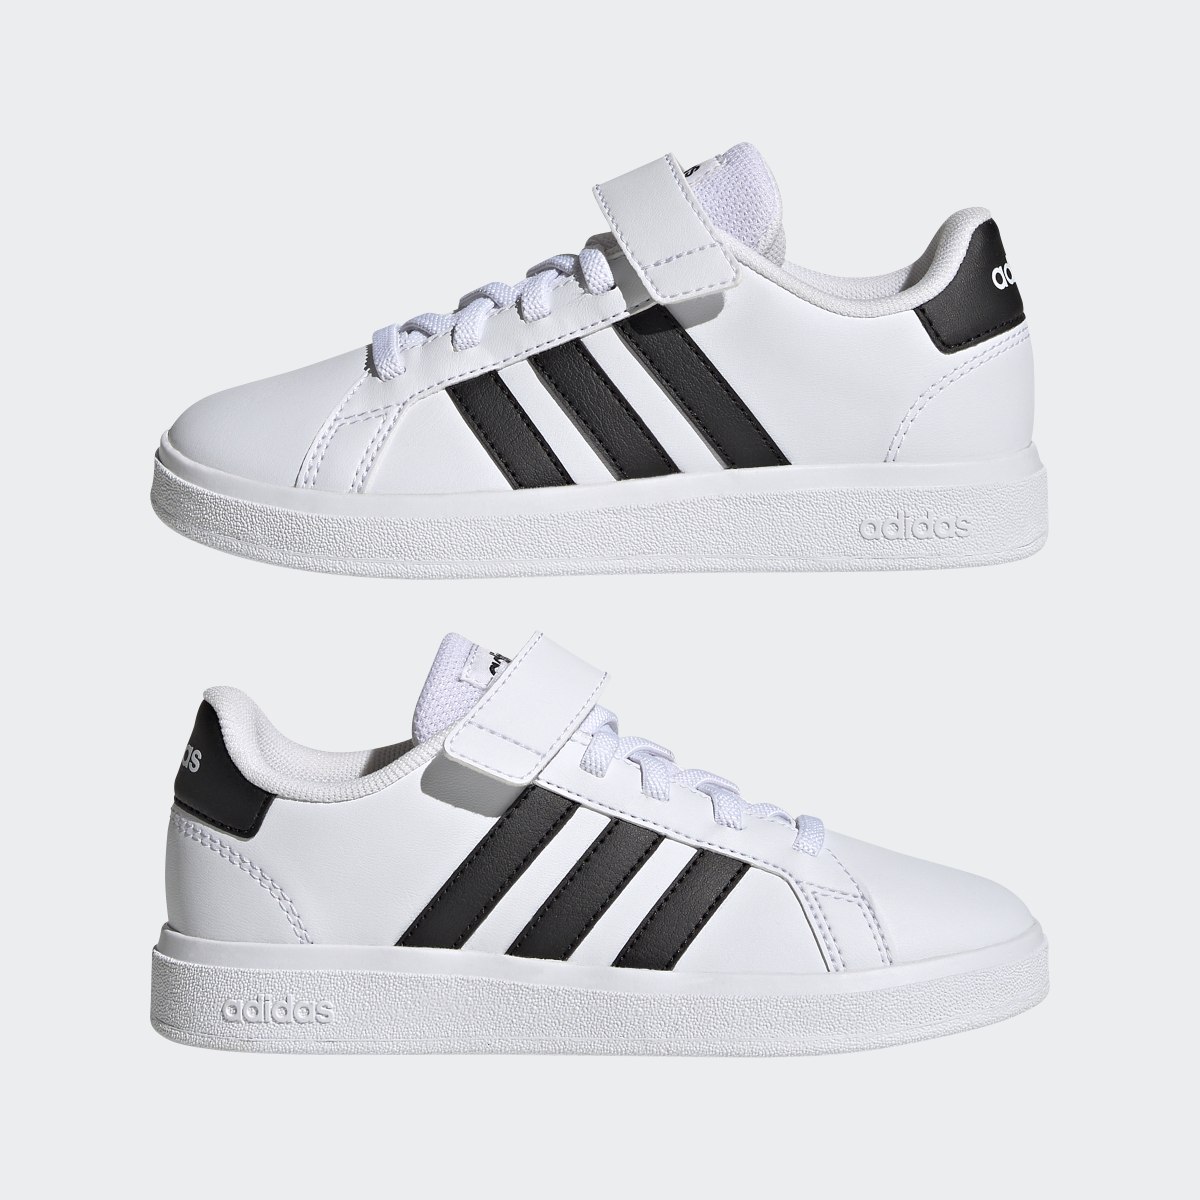 Adidas Grand Court Elastic Lace and Top Strap Ayakkabı. 8